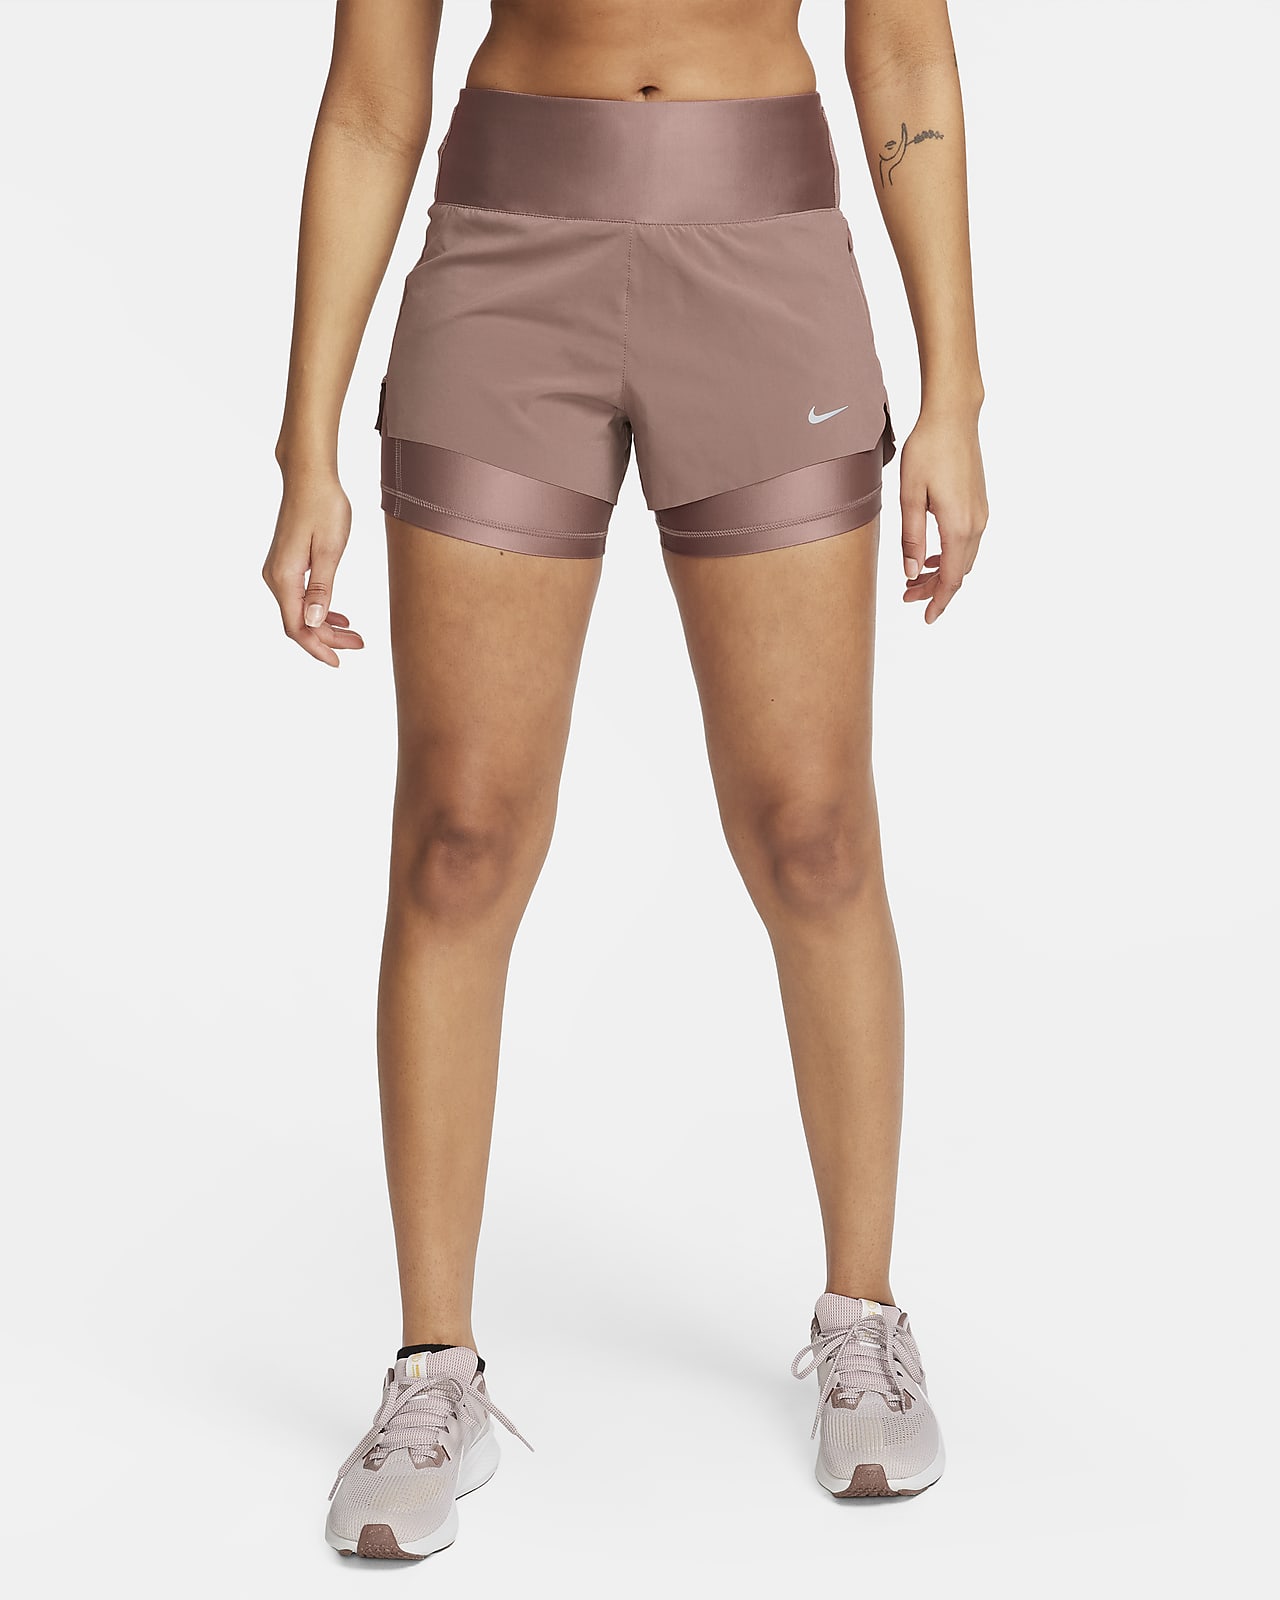 Nike Dri-FIT Swift Women's Mid-Rise 3" 2-in-1 Running Shorts with Pockets